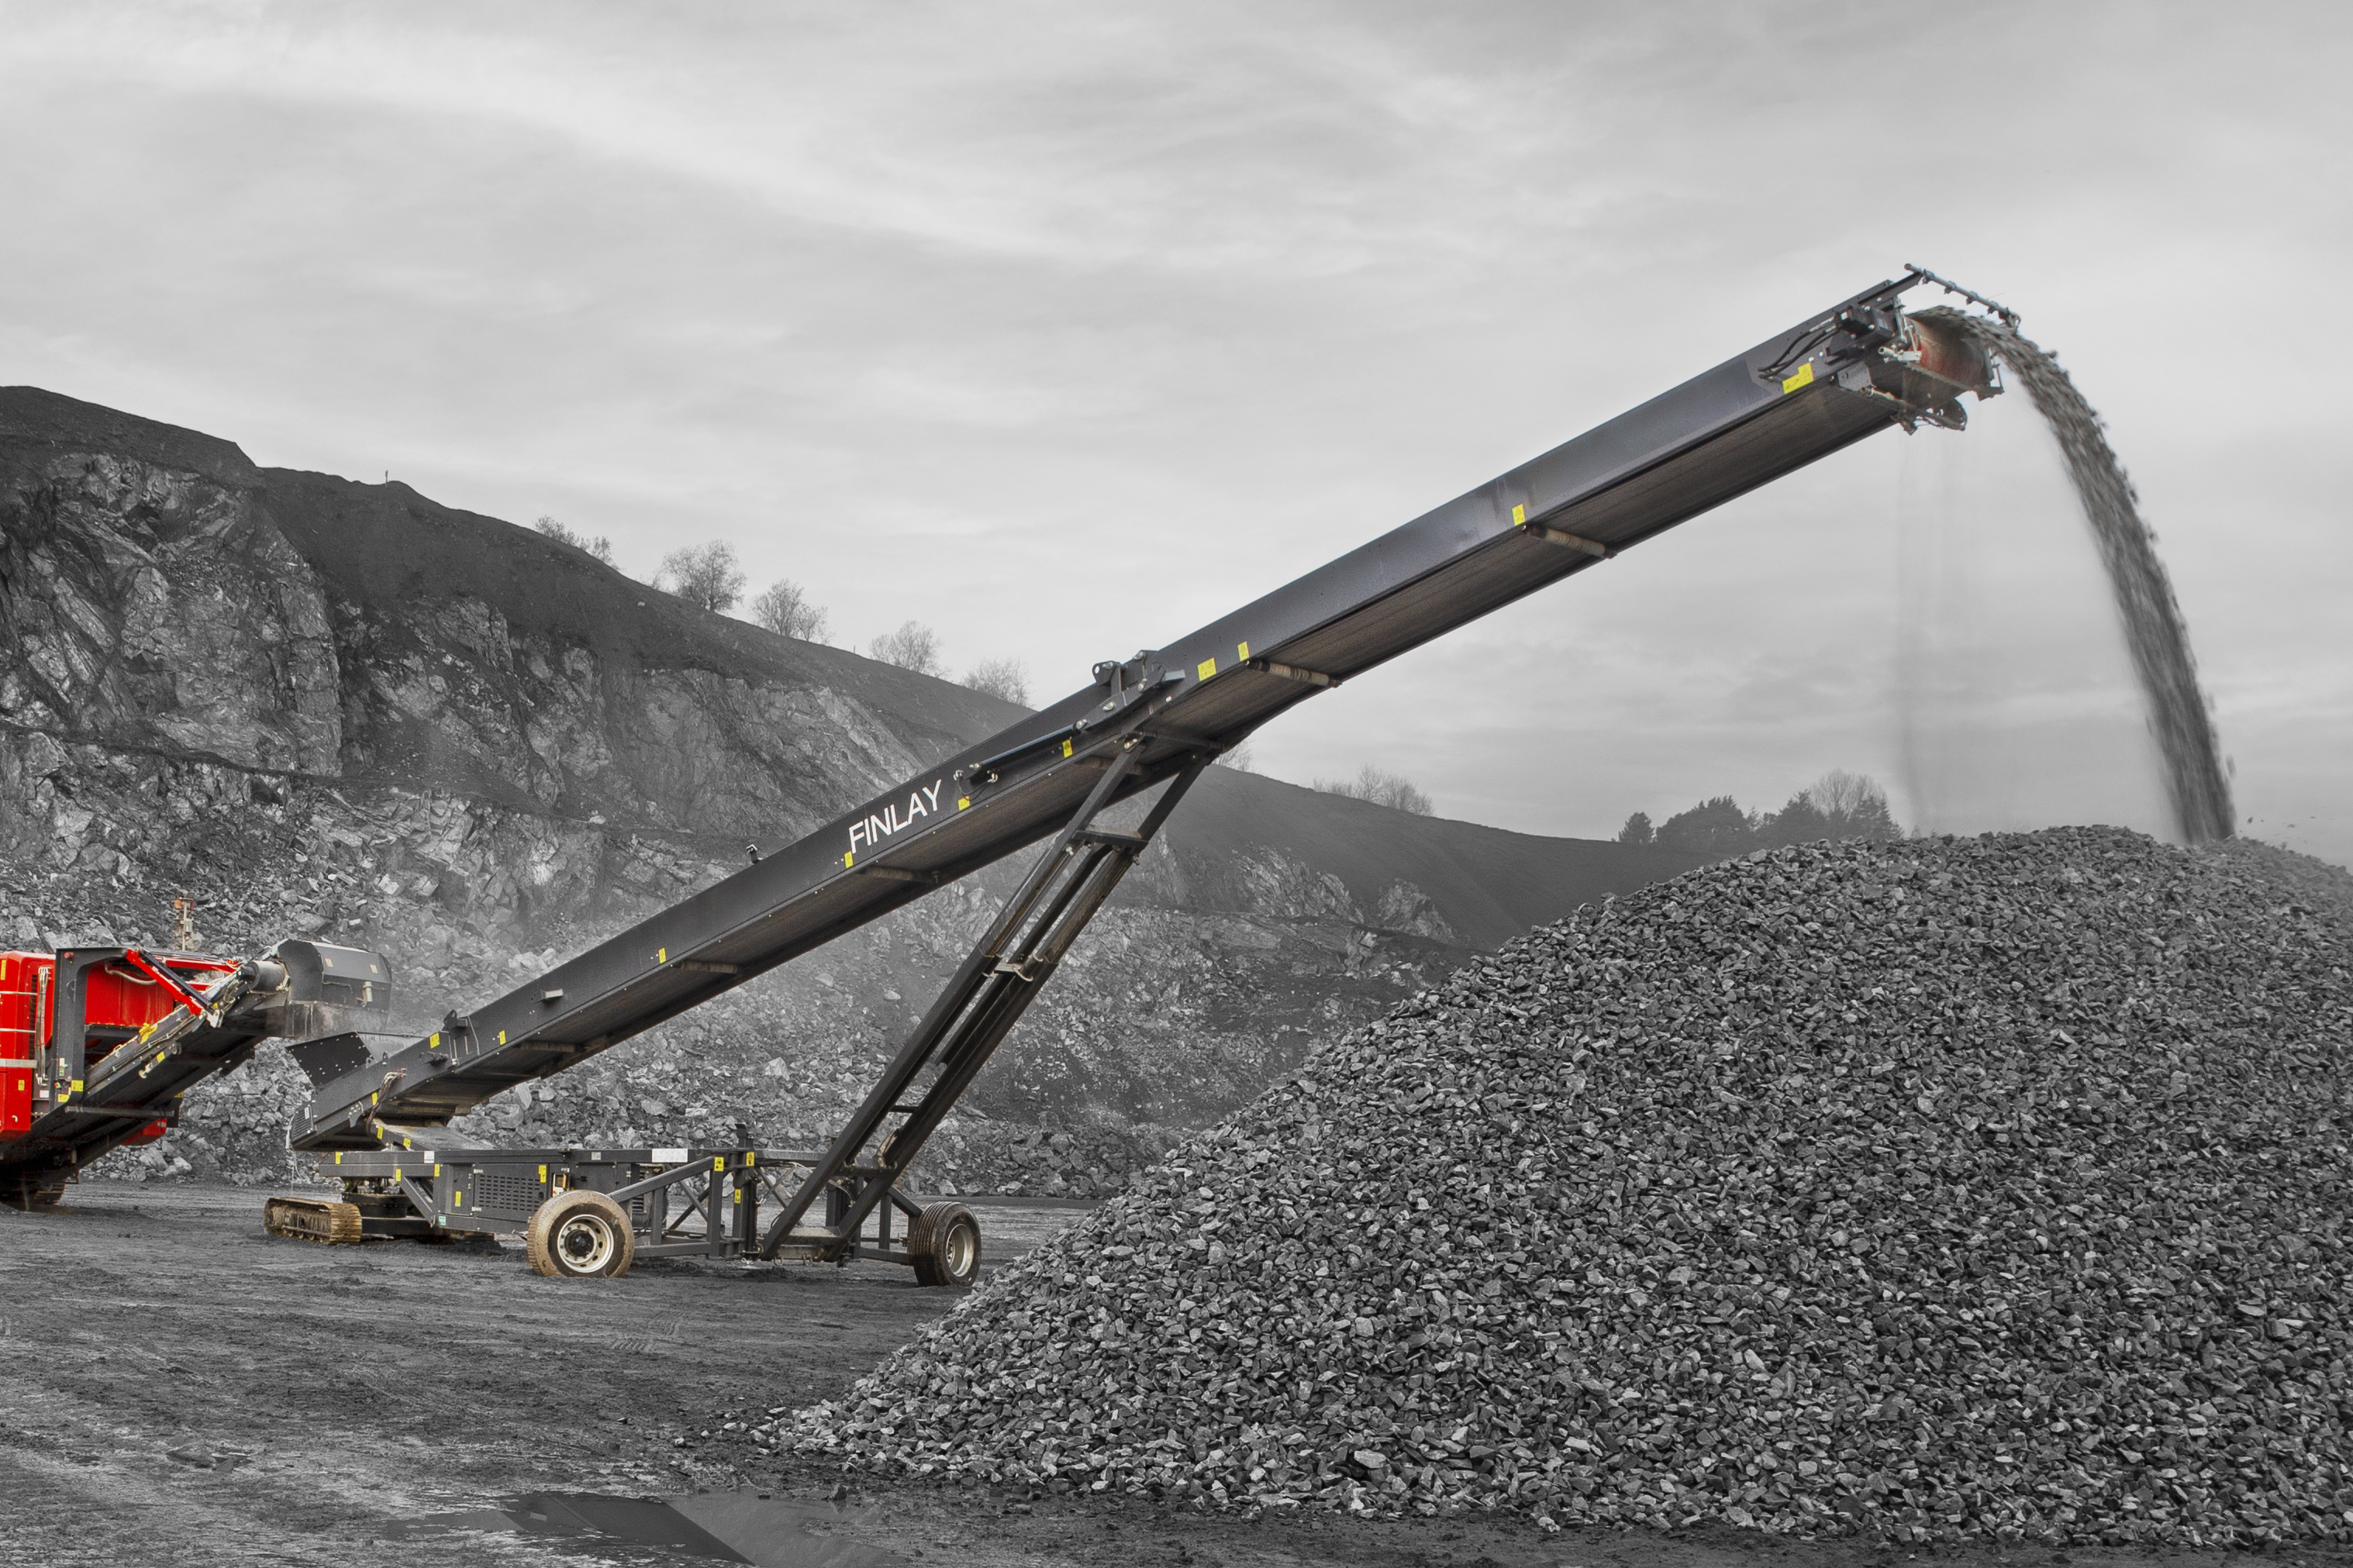 The new TR-80 Radial Conveyor can be integrated into static operations or as part of a mobile crushing and screening set up in a diverse range of applications.